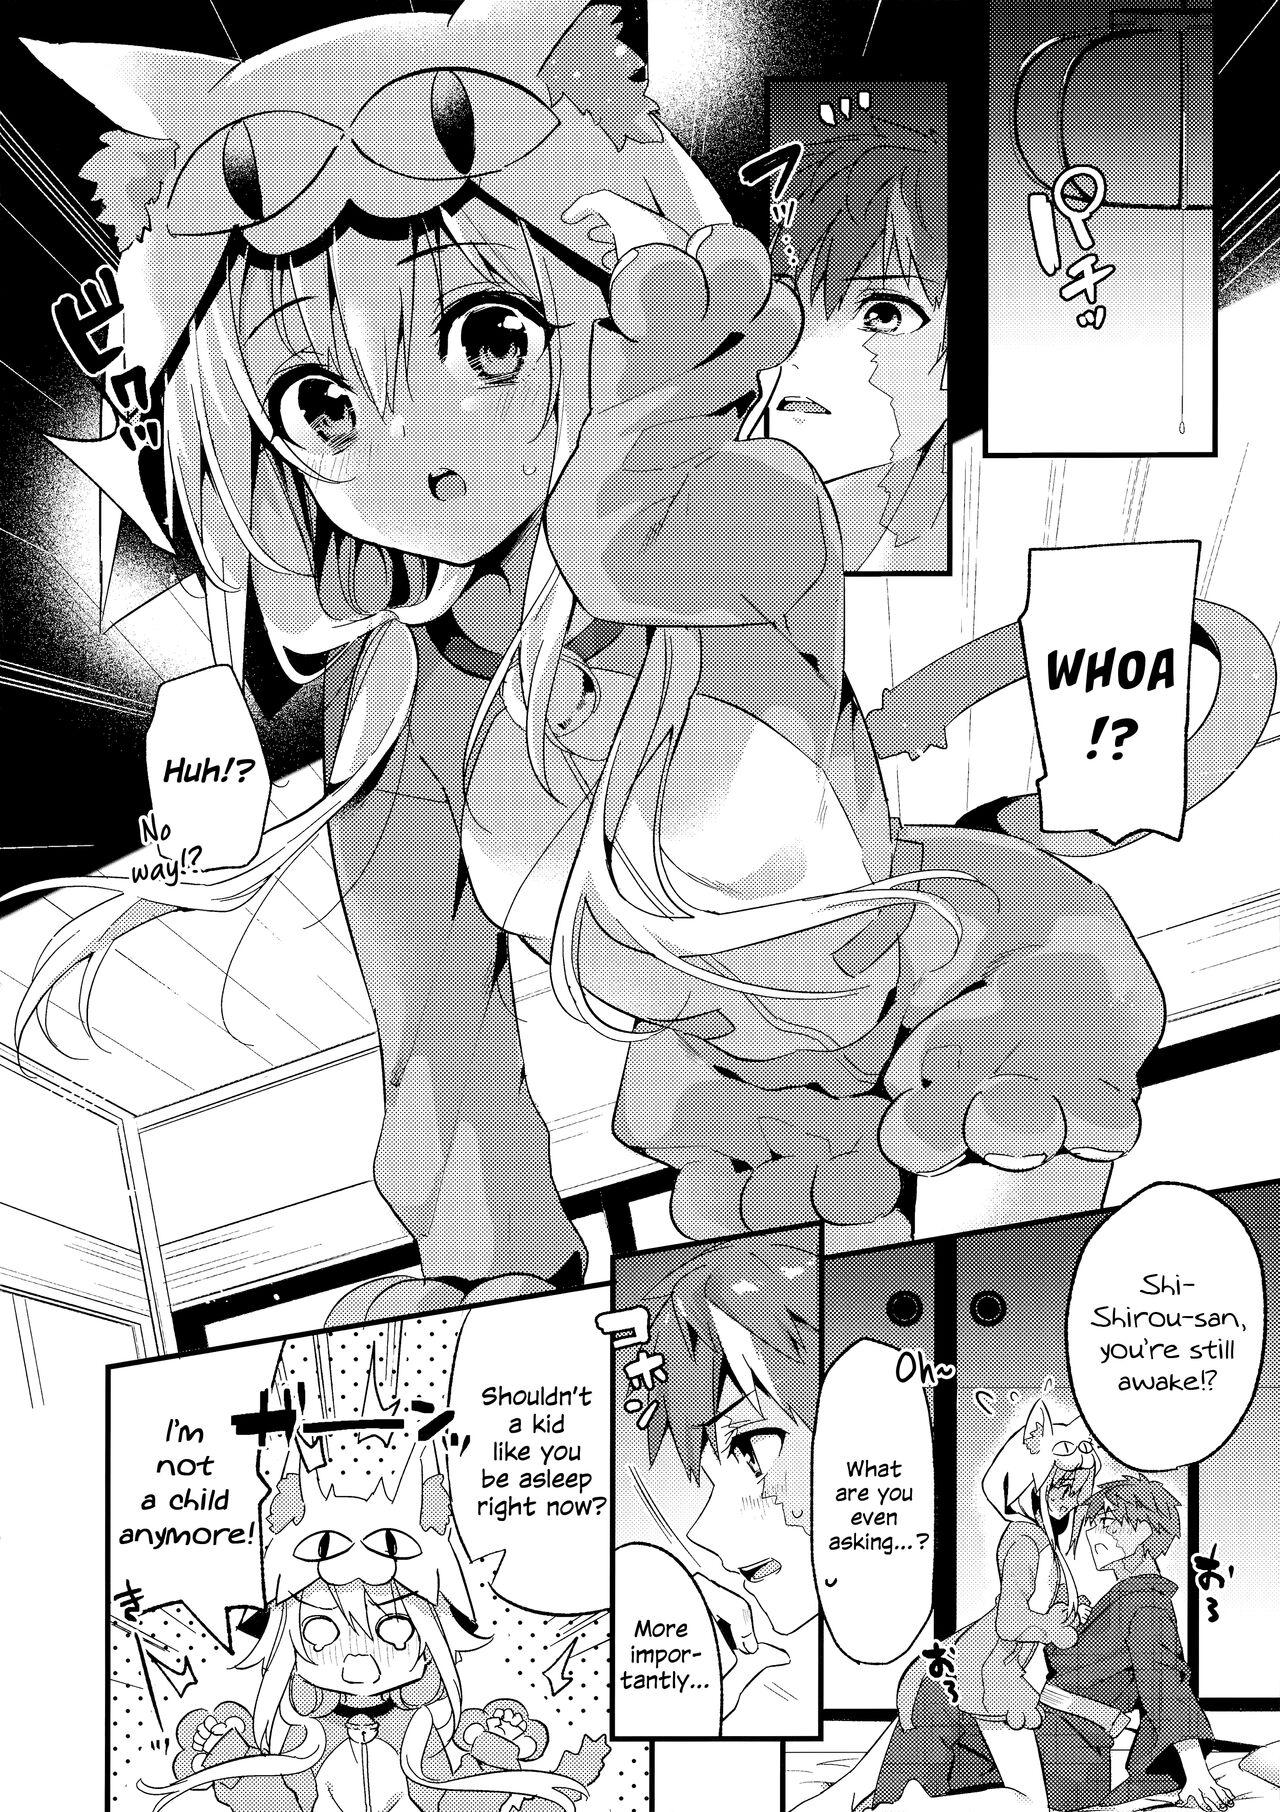 Cams Onii-chan, Illya to Shiyo? - Fate kaleid liner prisma illya Playing - Page 5